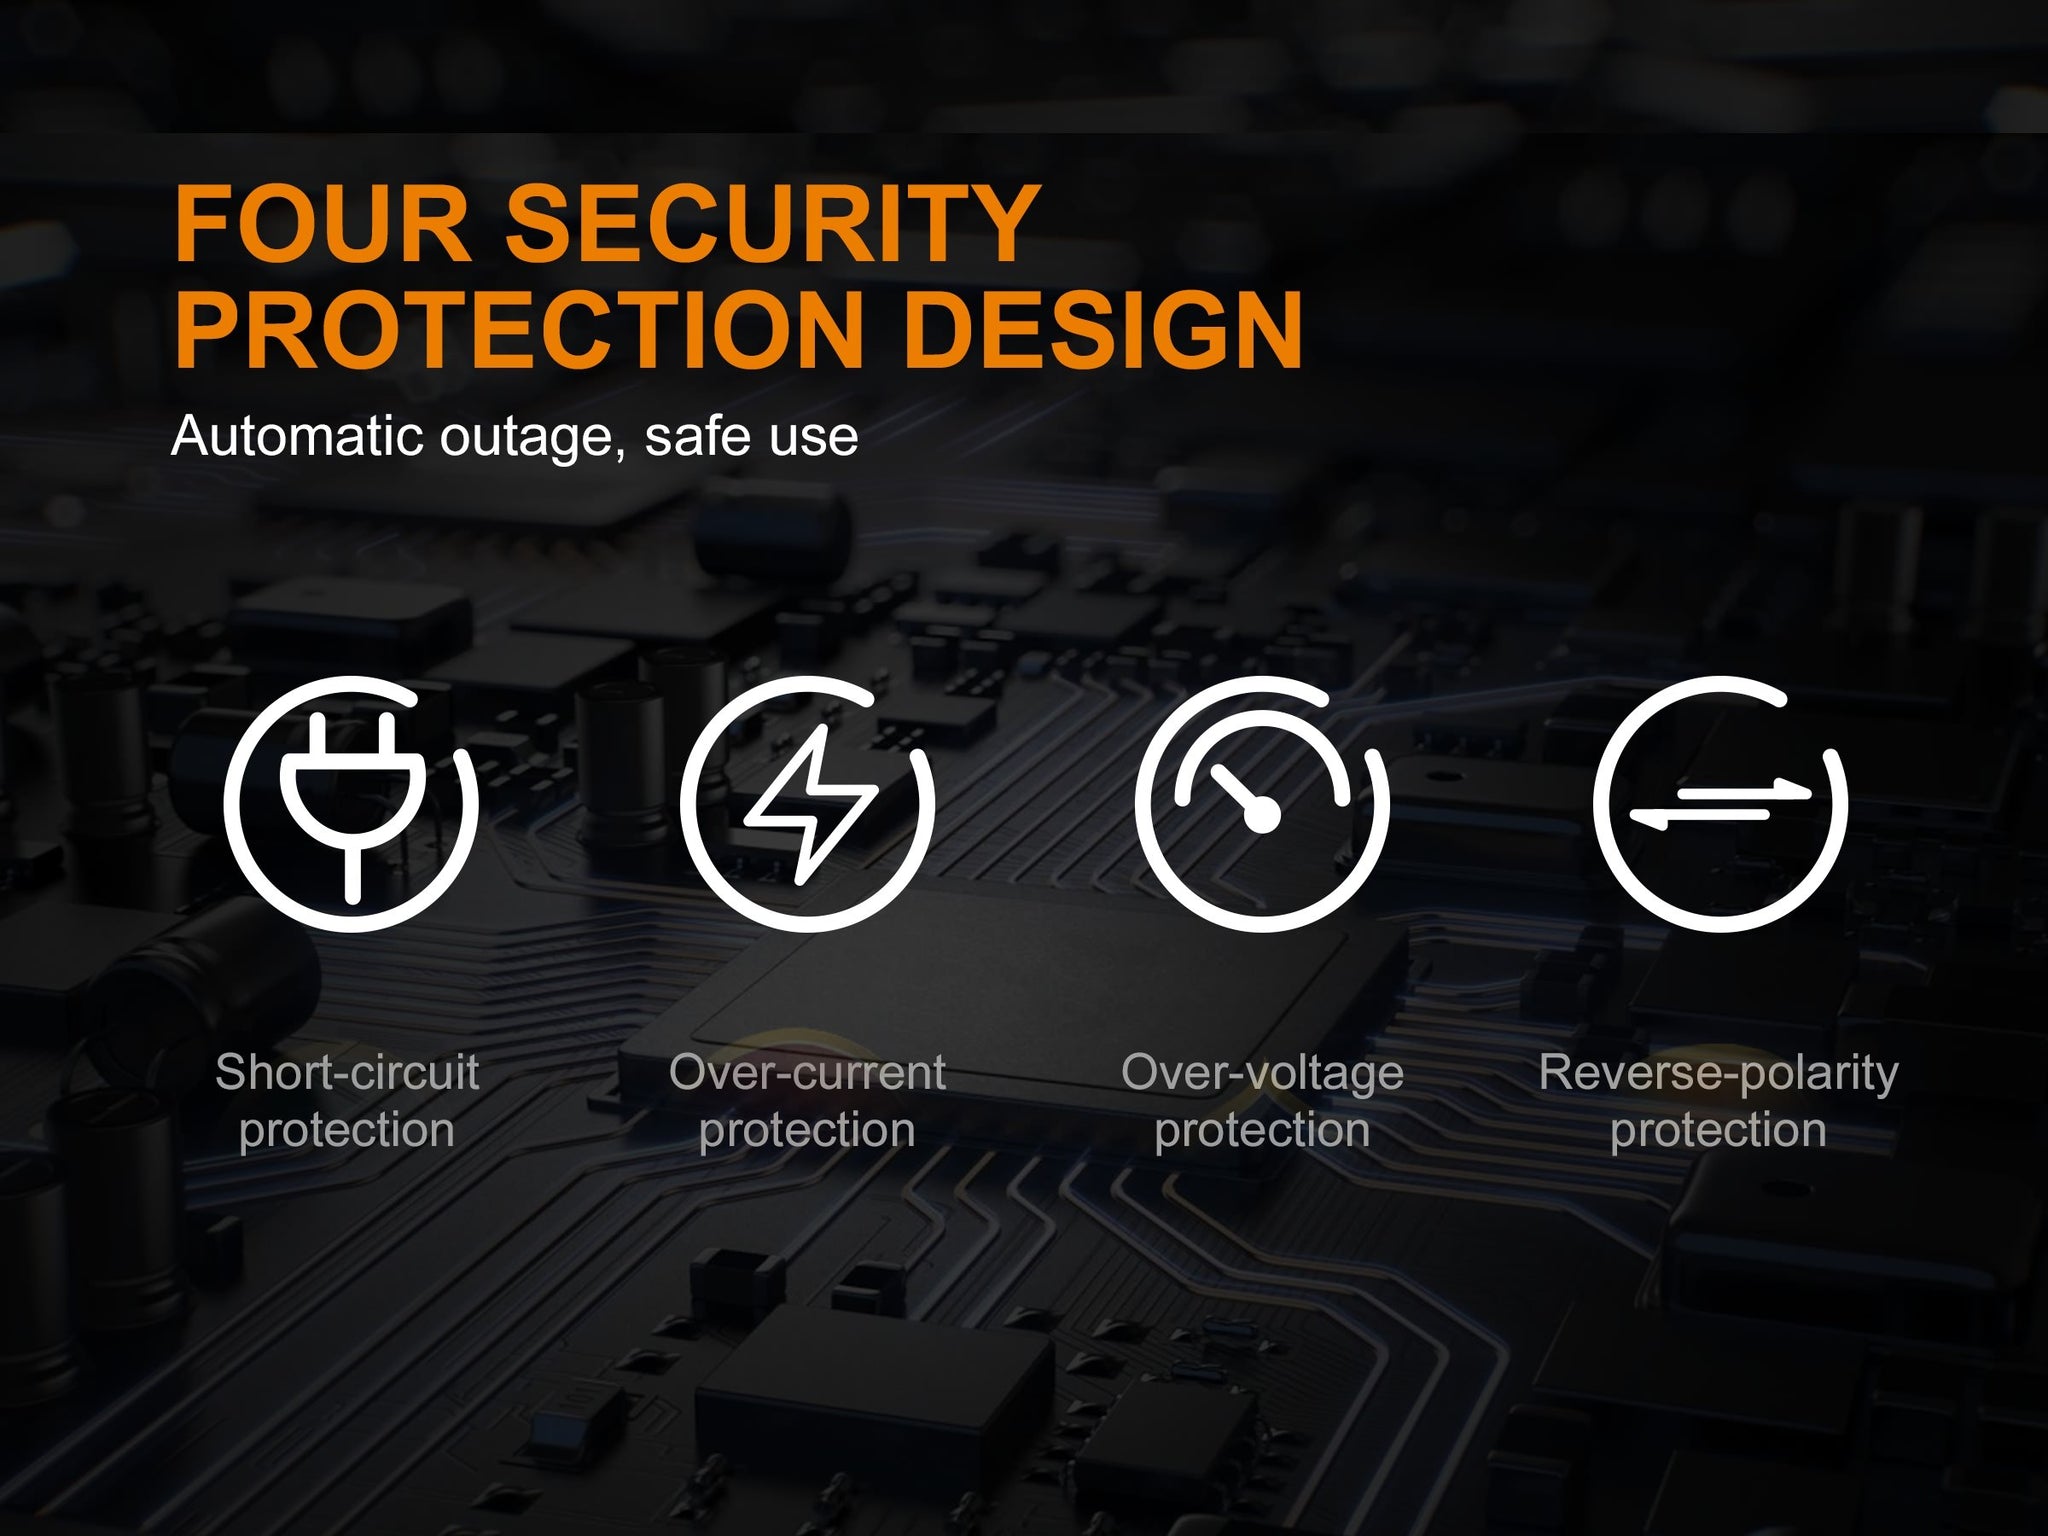 Four security protection design